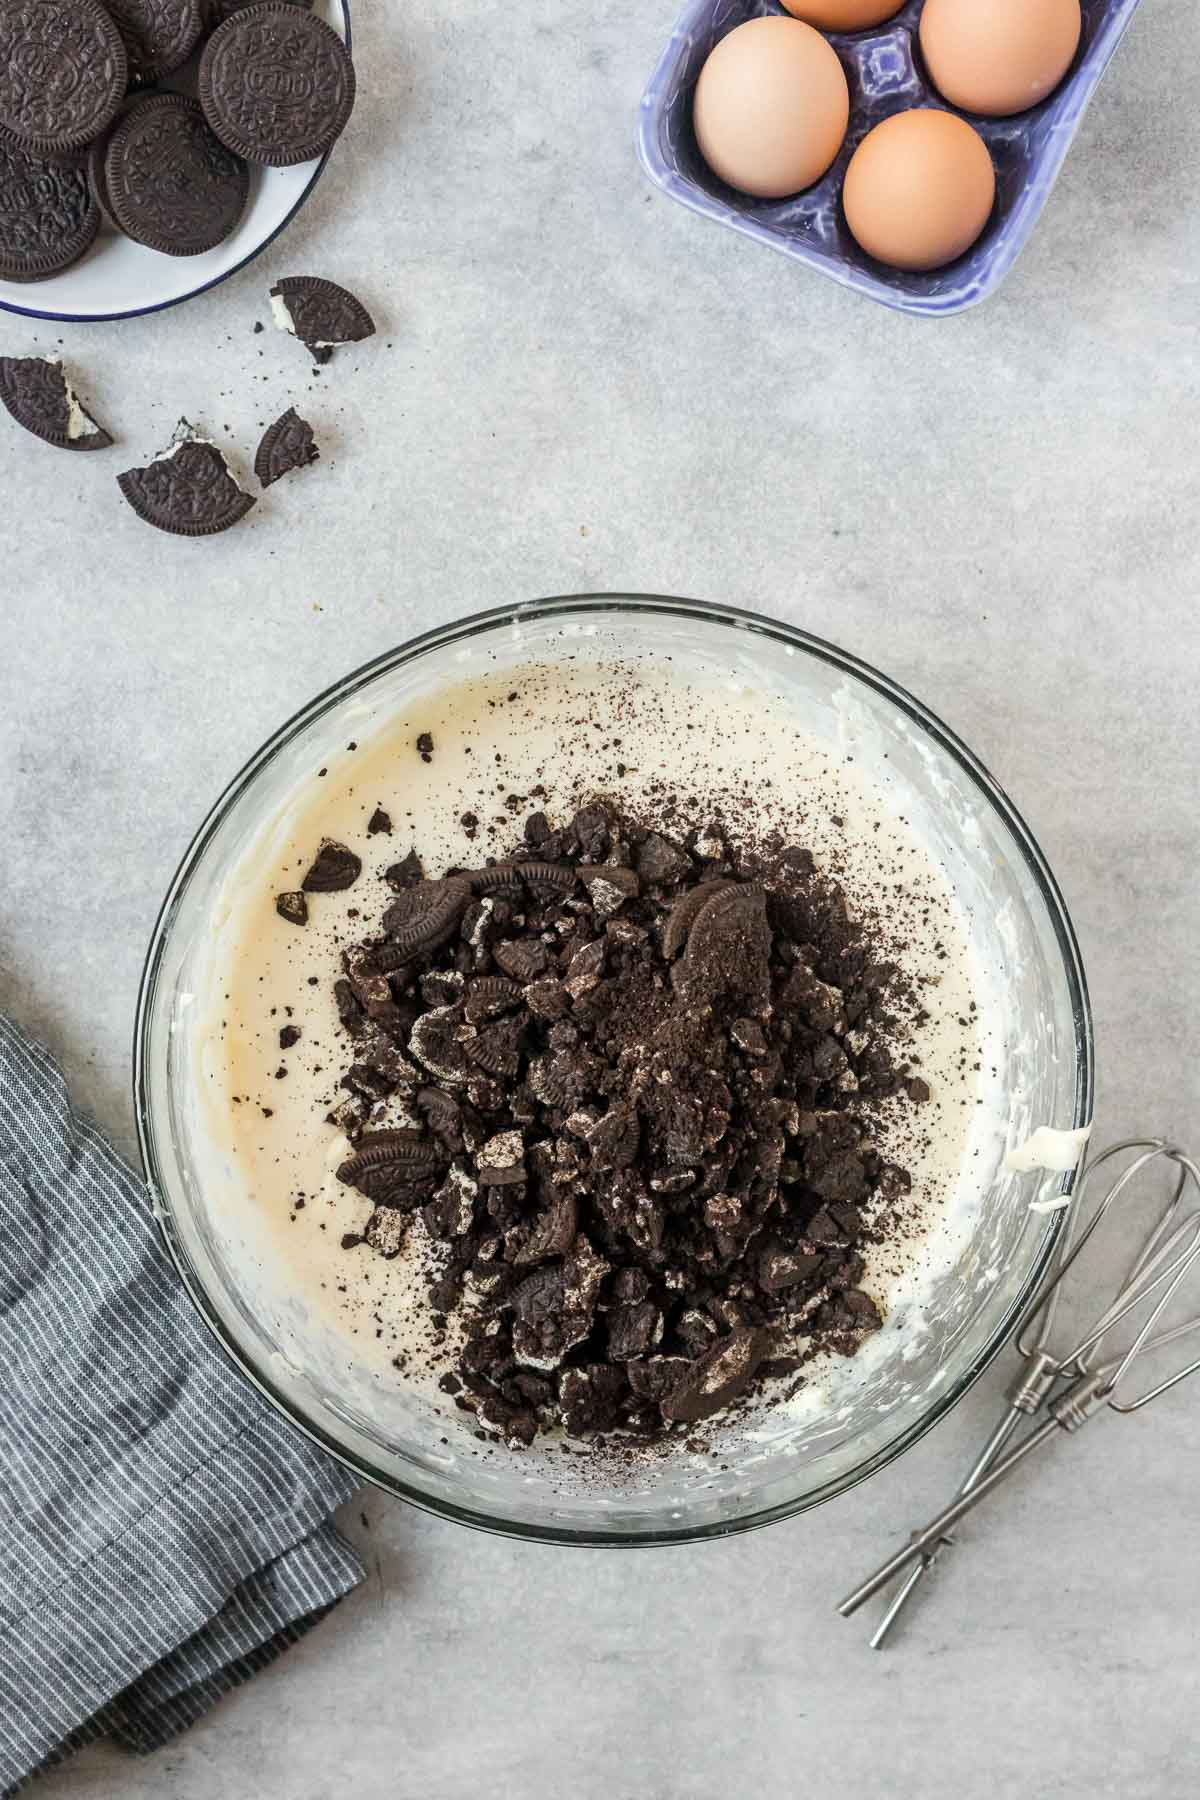 Oreo cookie crumbs stirred into cheesecake batter